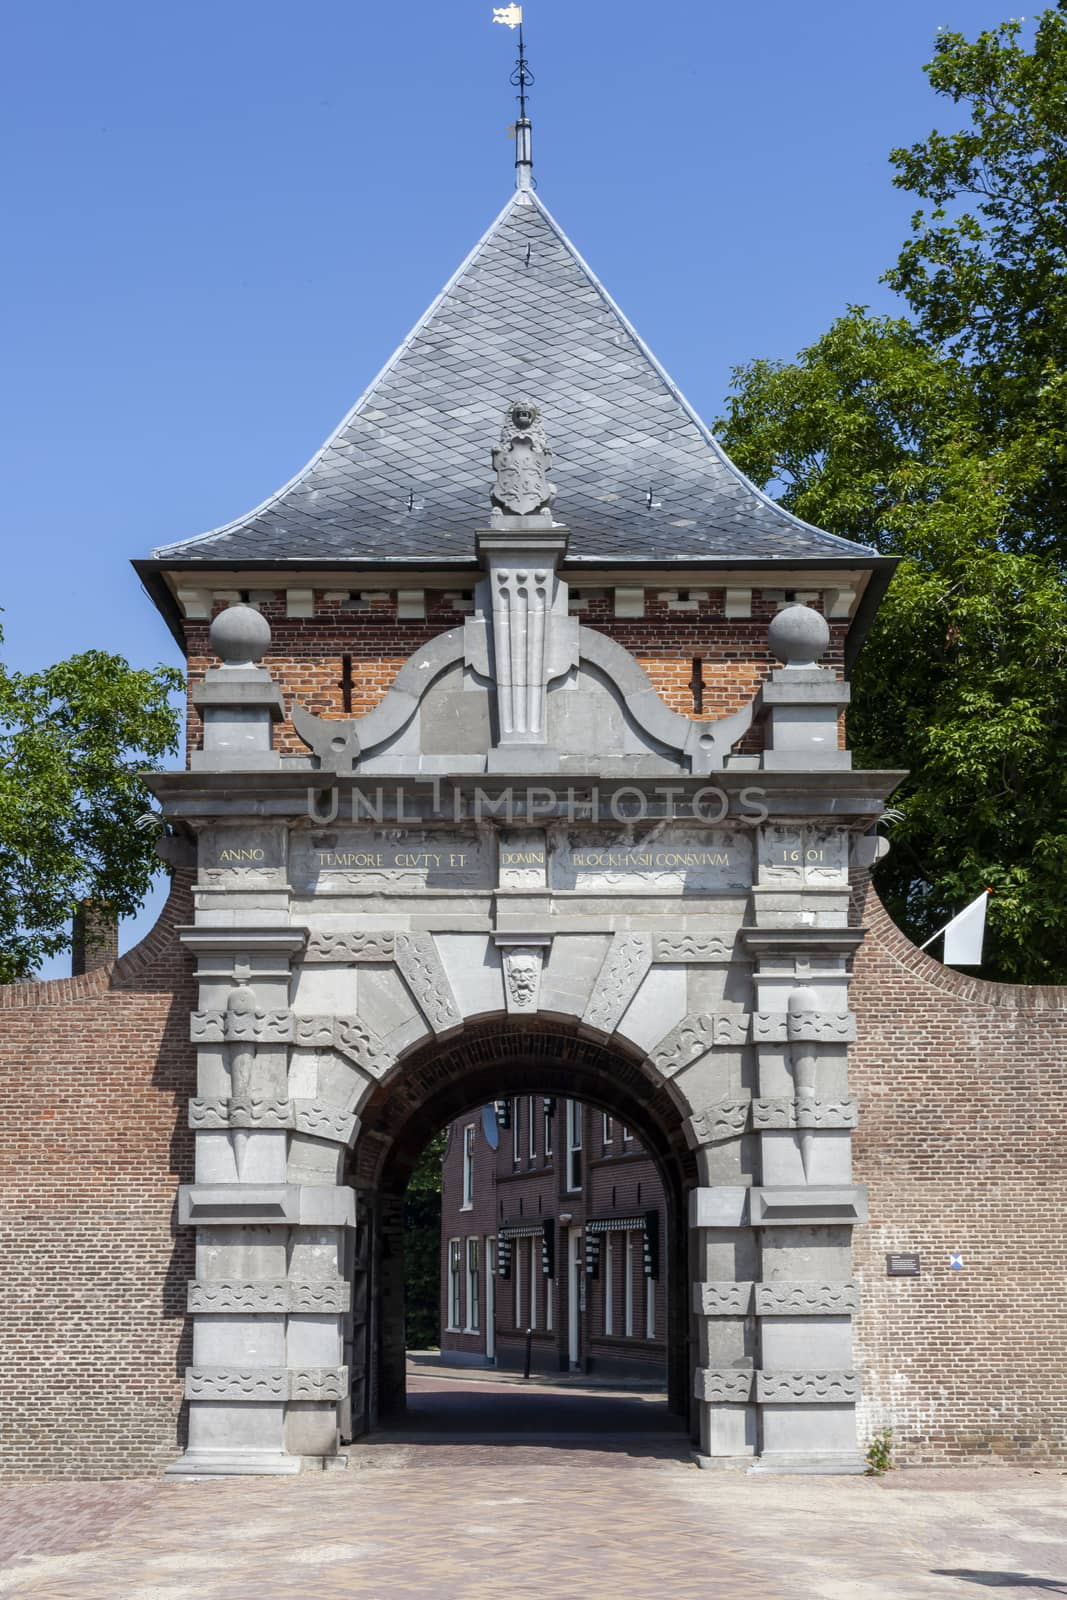 Medieval archway to the port of the picturesque village Schoonhoven near the river Lek in the Netherlands